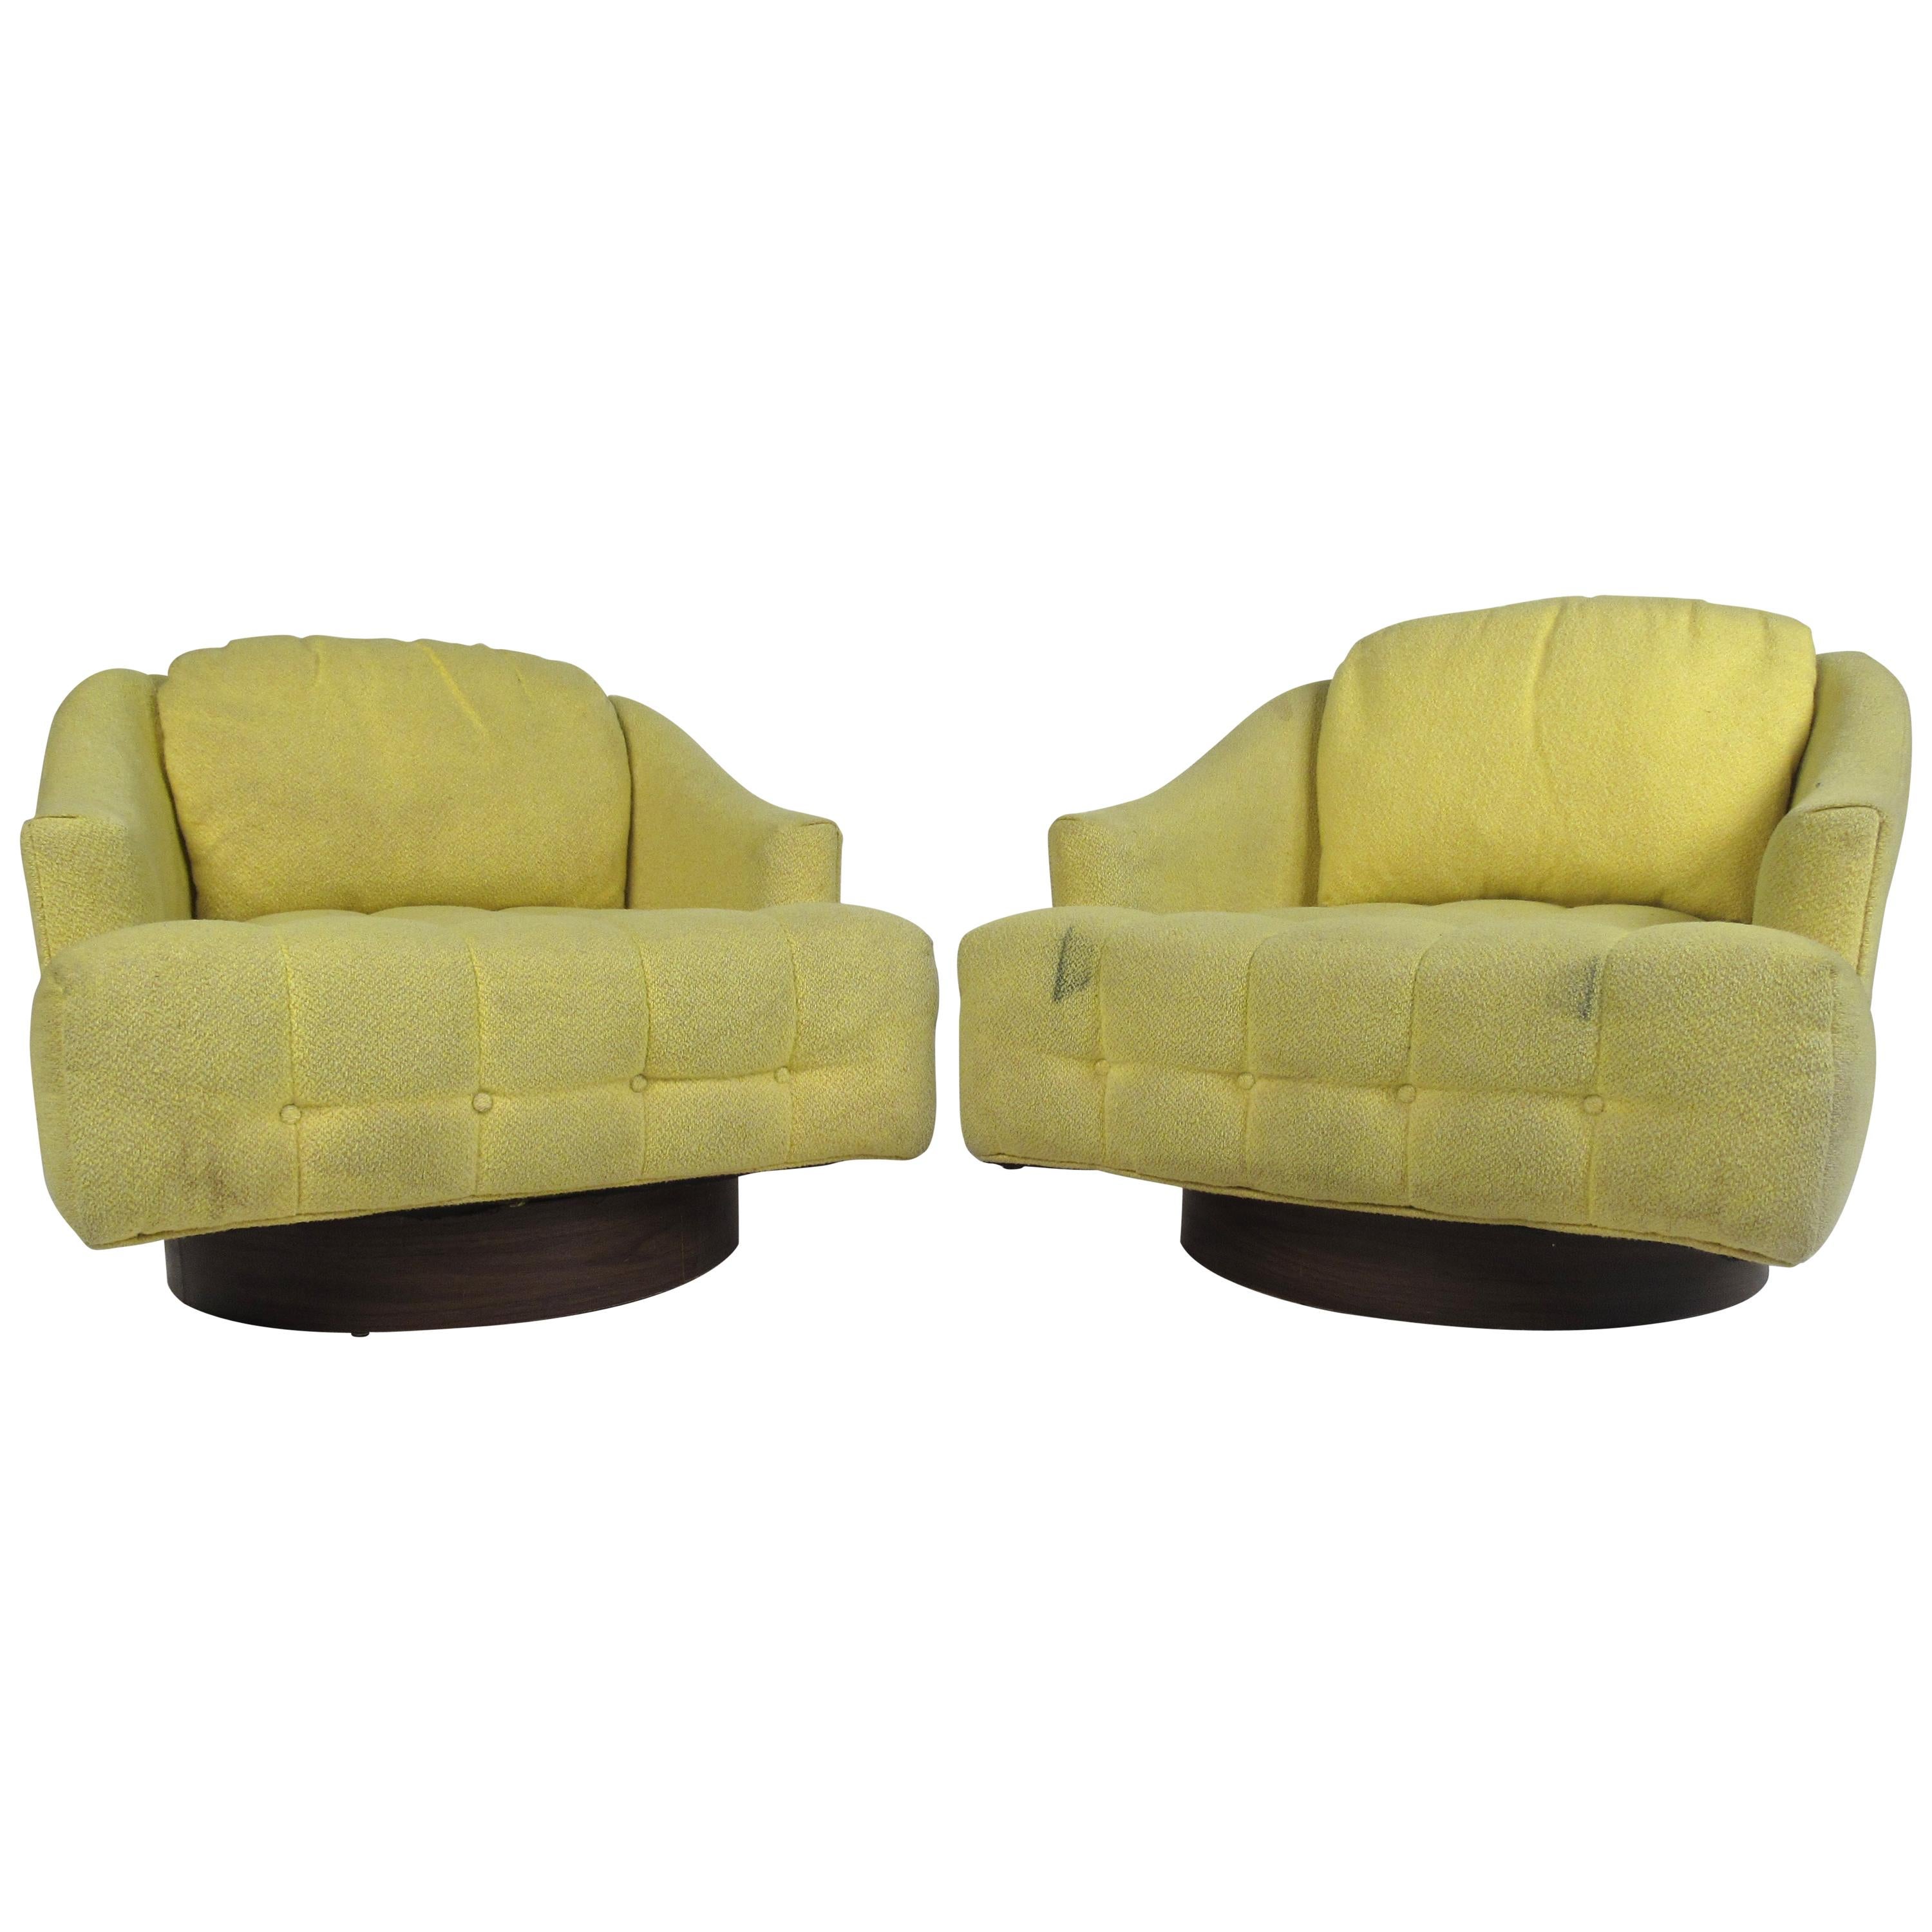 Pair of Vintage Barrel Back Swivel Lounge Chairs For Sale